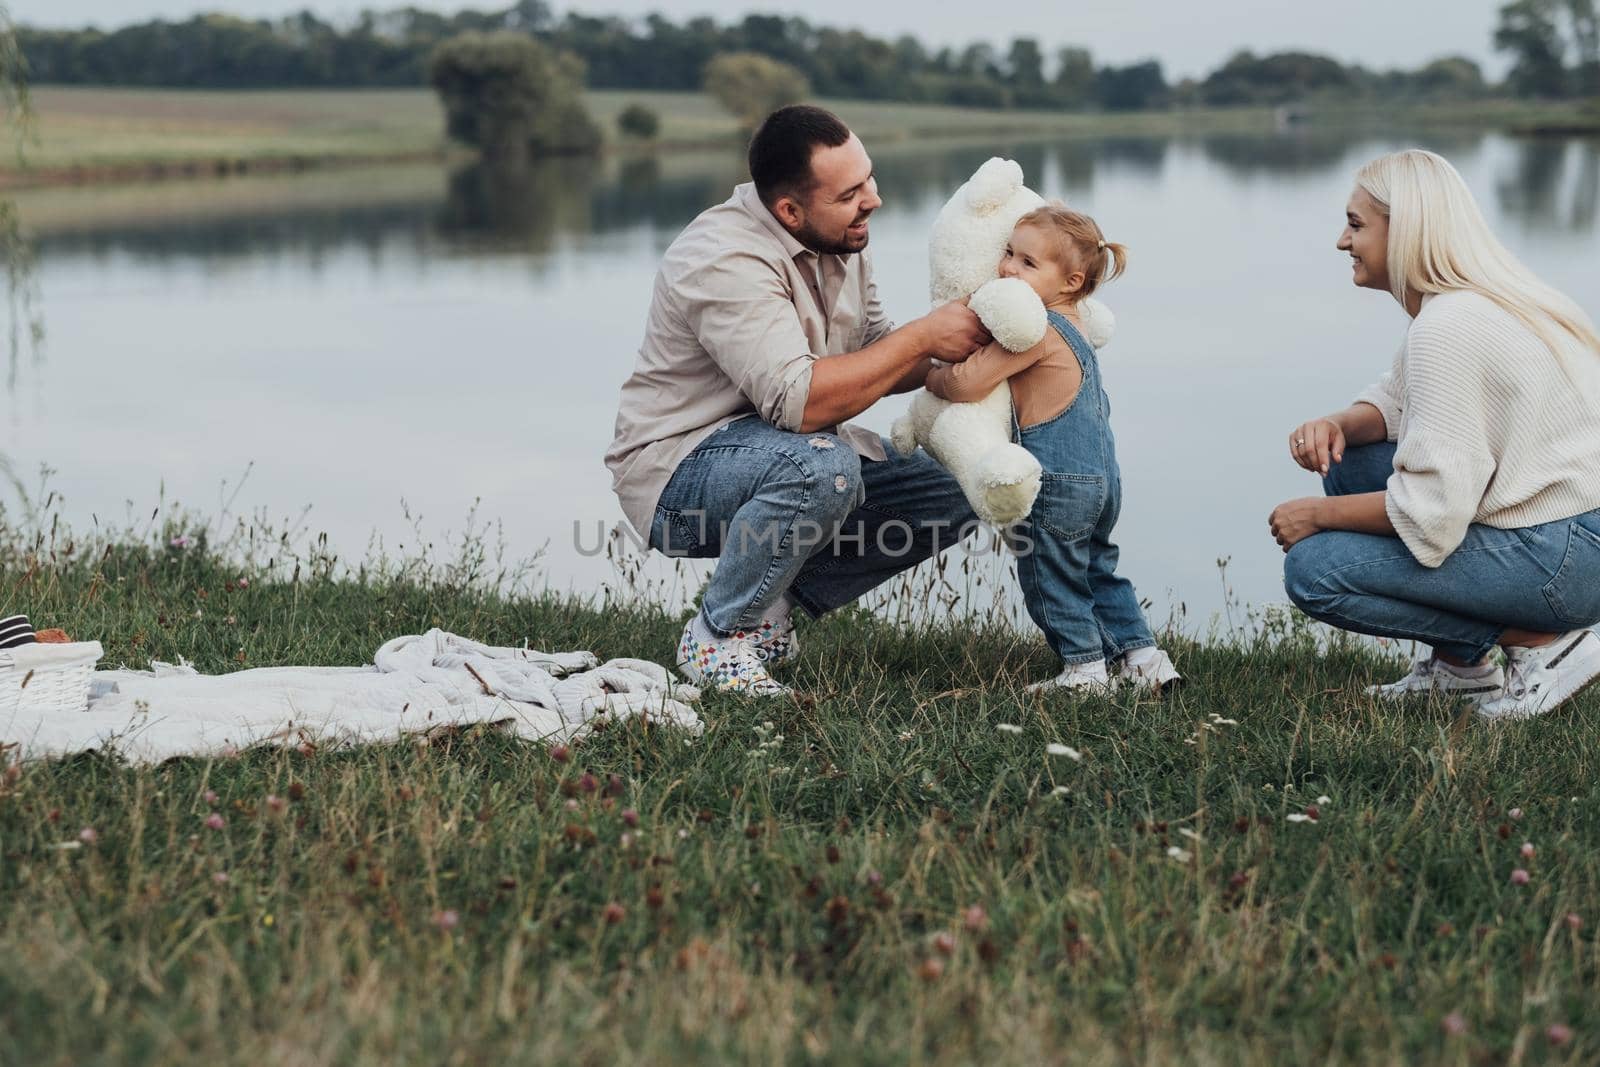 Father Gave His Child Soft Toy, Little Daughter Hugging Teddy Bear, Young Family Enjoying Picnic Outdoors Near Lake